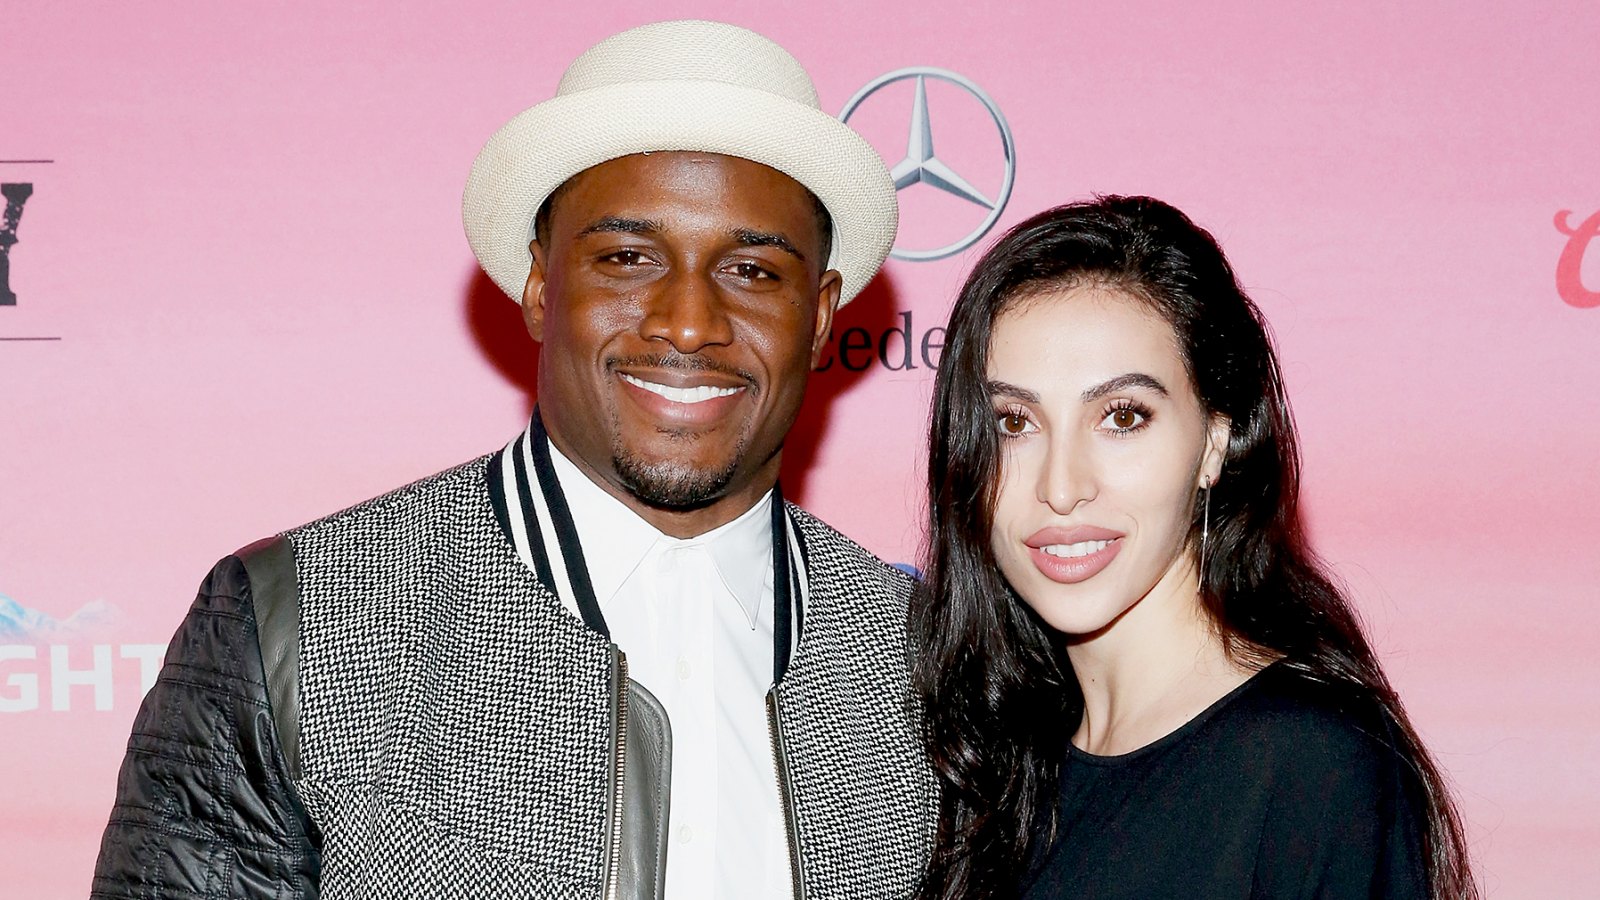 NFL player Reggie Bush (L) and Lilit Avagyan attend ESPN the Party at WestWorld of Scottsdale on January 30, 2015 in Scottsdale, Arizona.